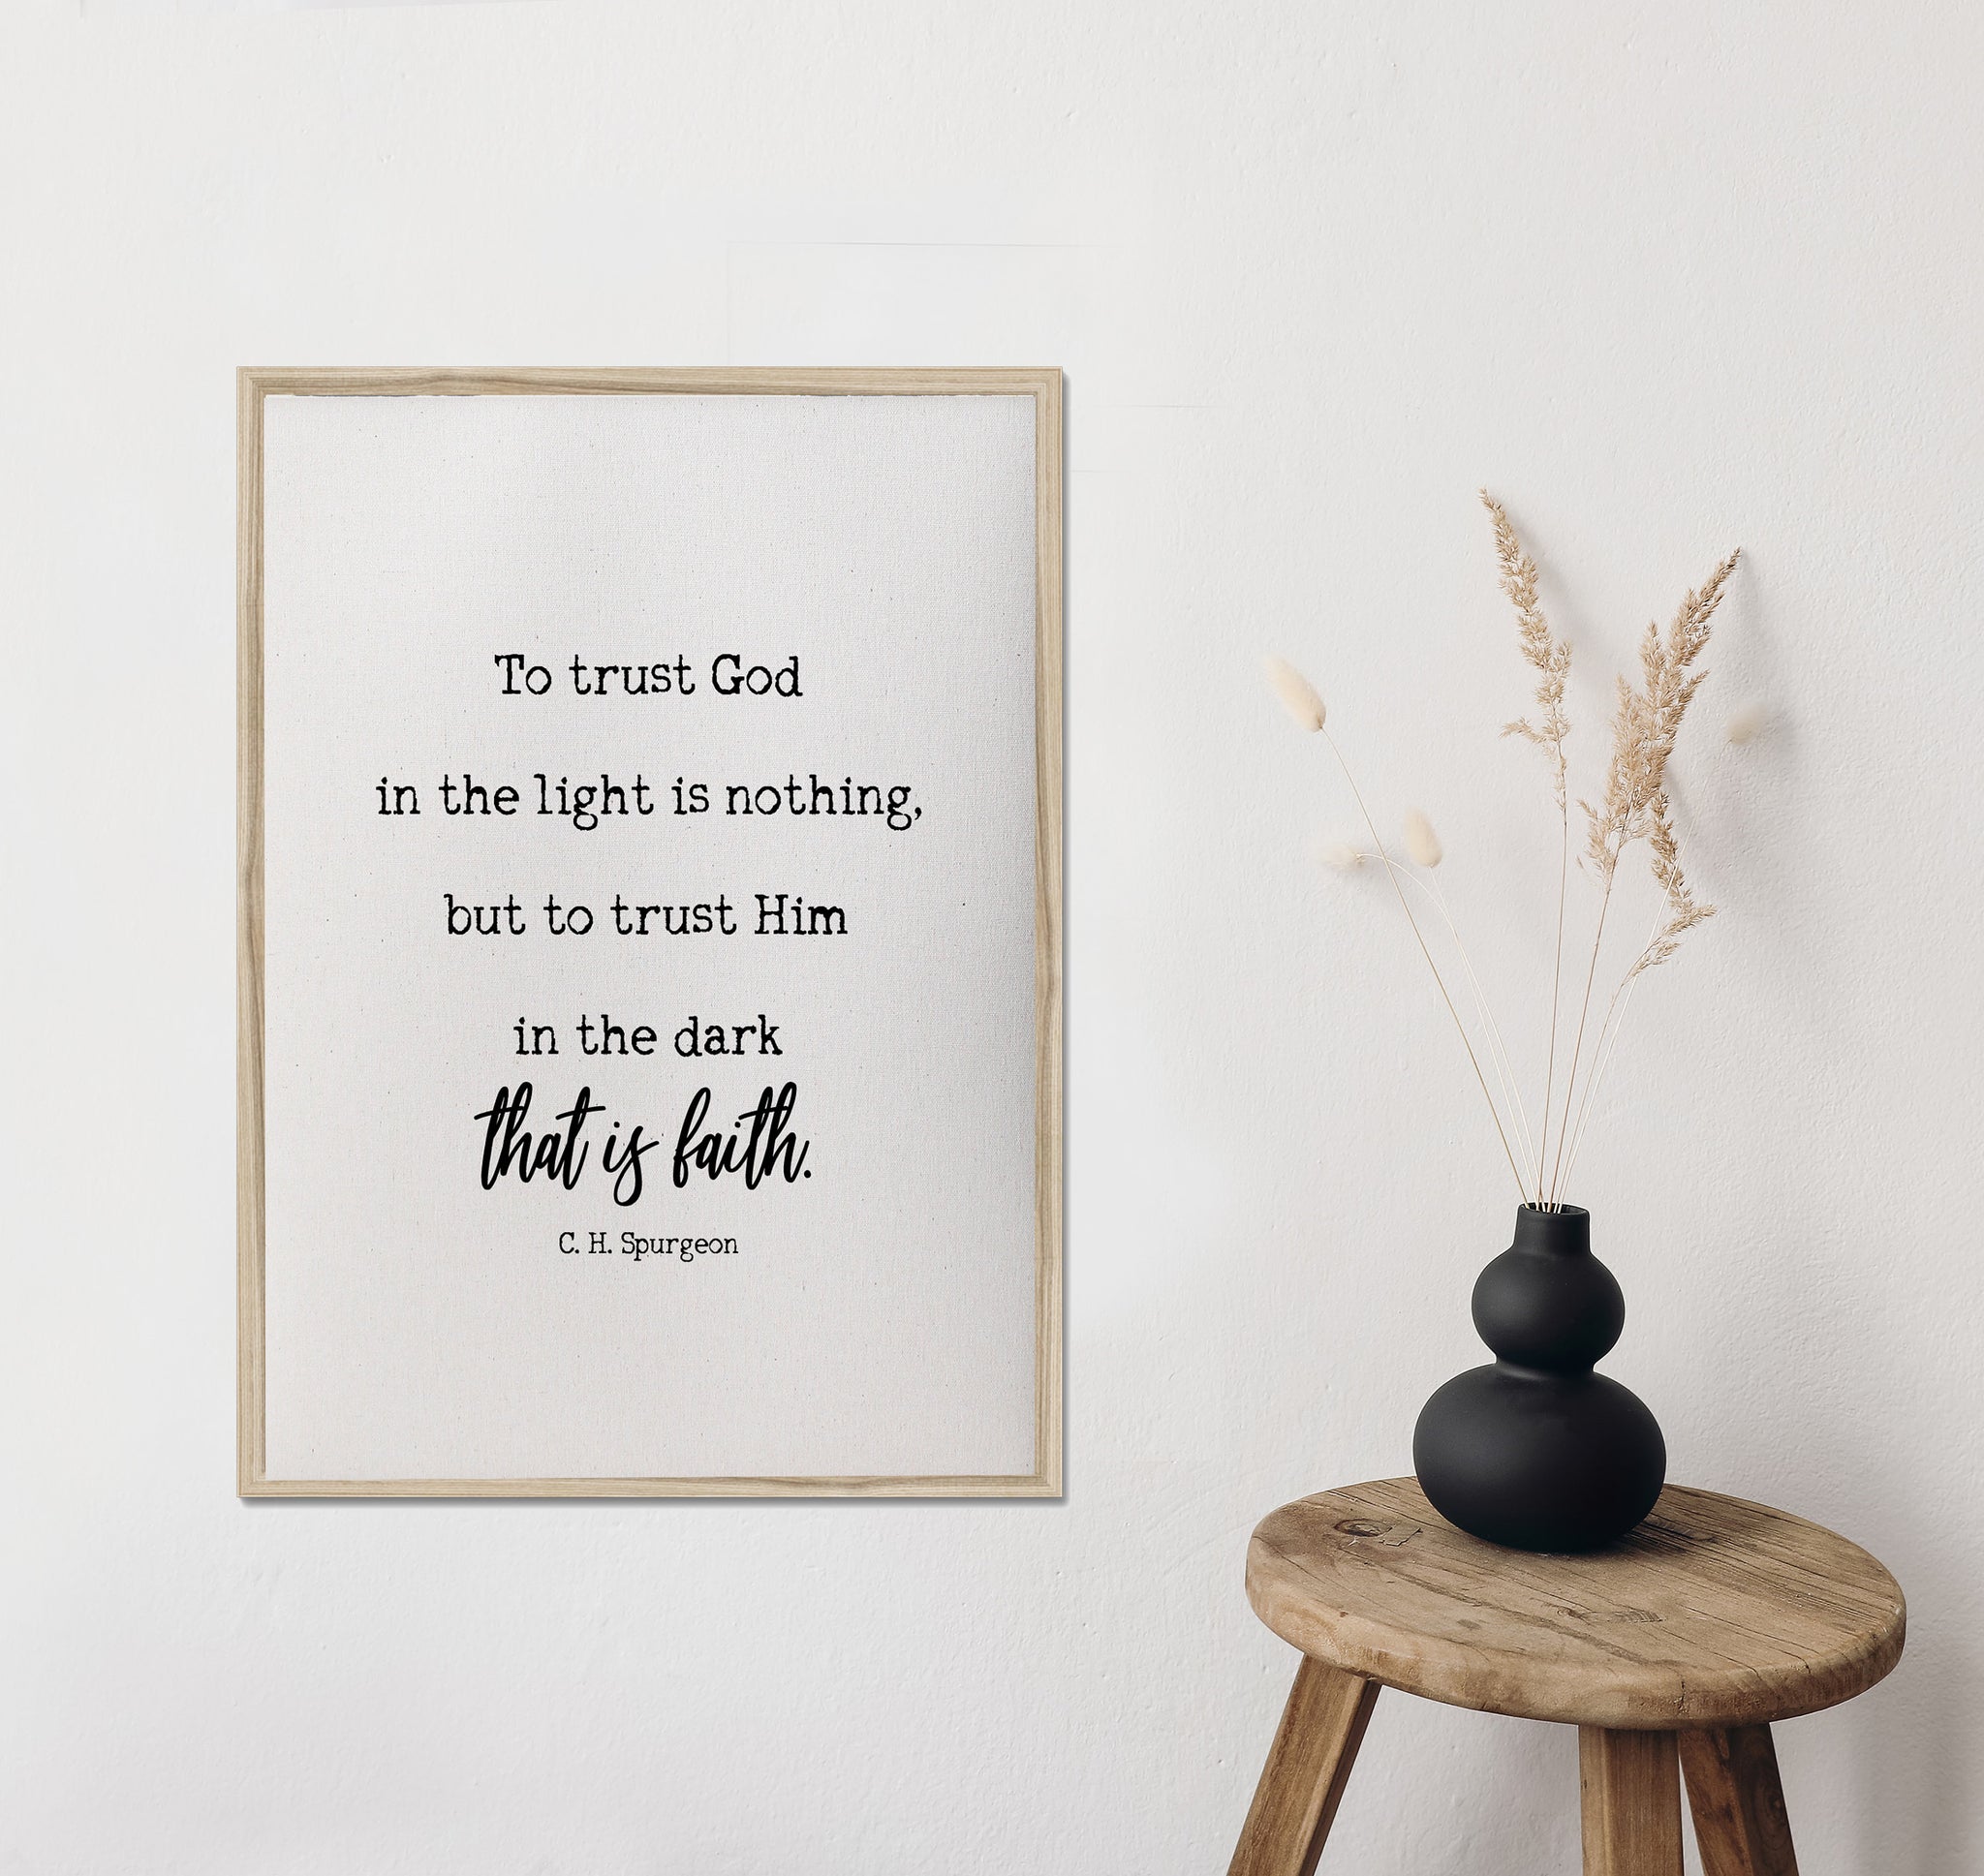 C.H. Spurgeon/To trust god in the light/canvas print/picture frame/tabletop sign/home decor/wall art